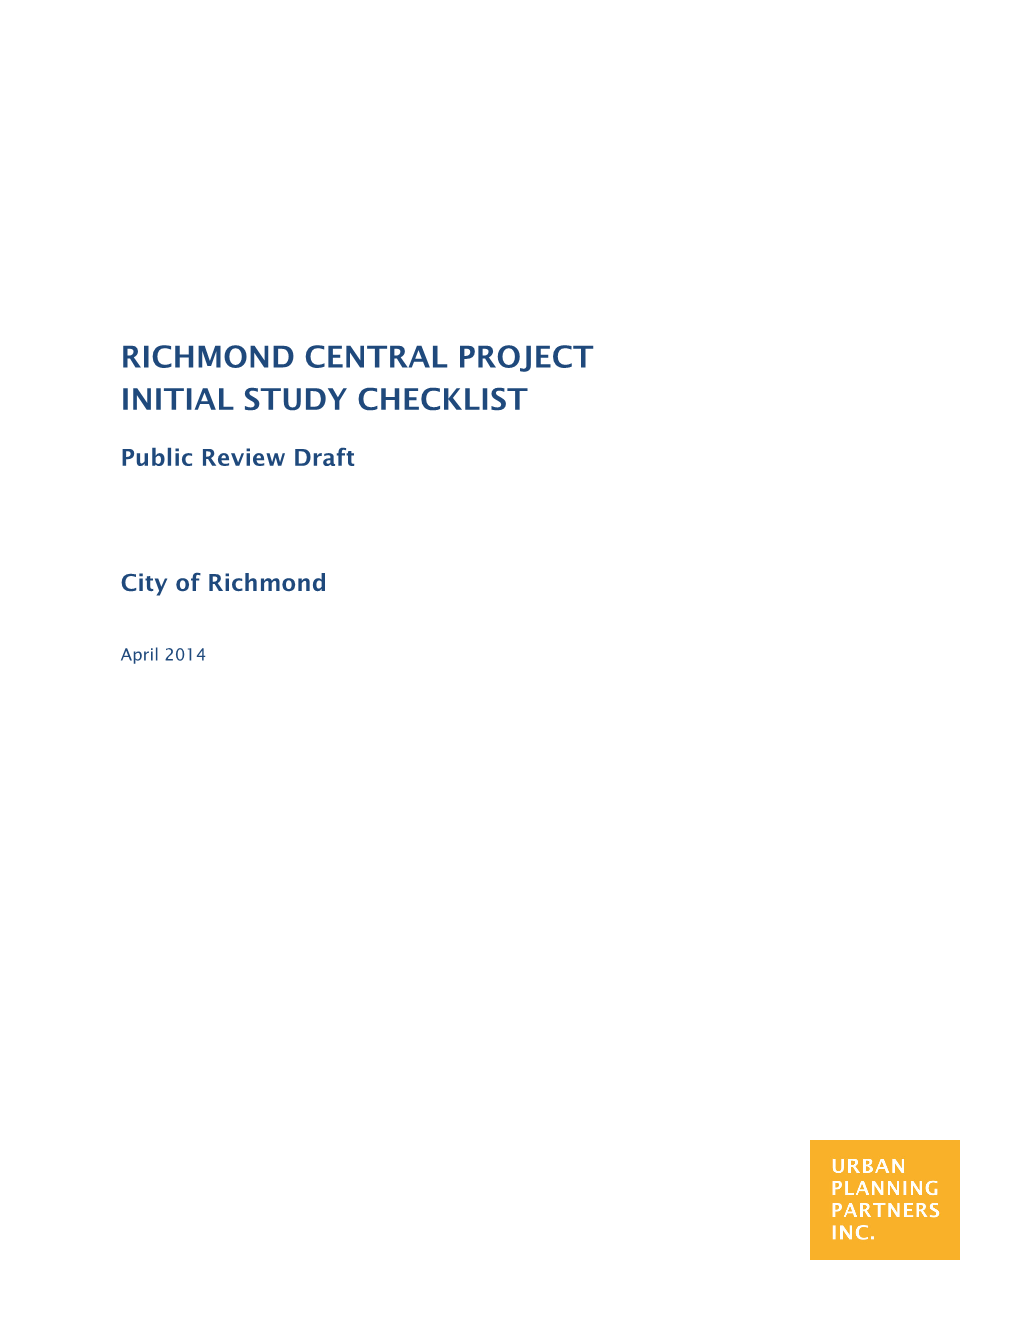 Richmond Central Project Initial Study Checklist